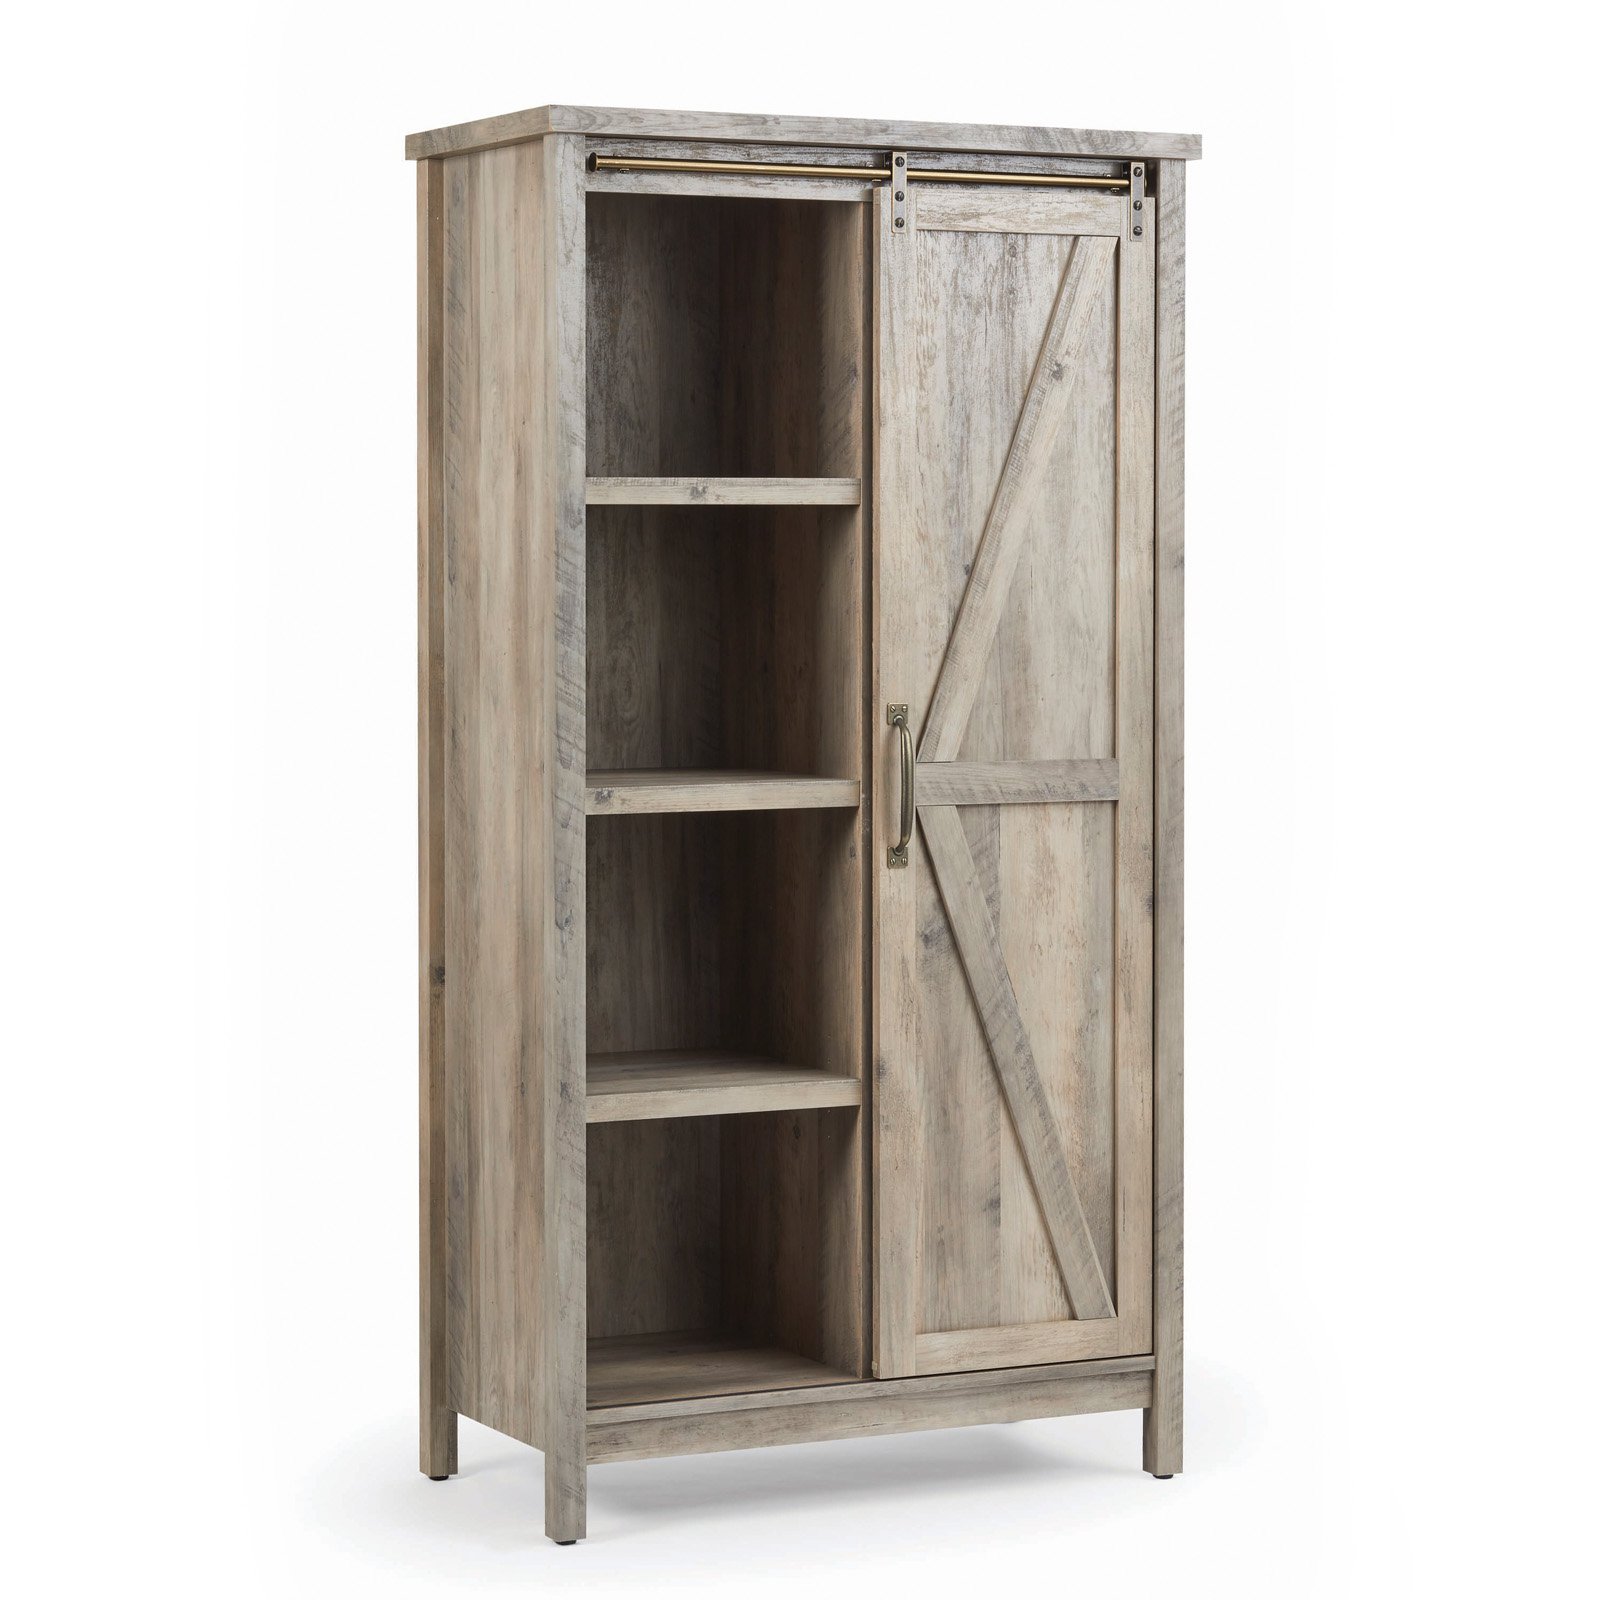 Storage Cabinets Better Homes and Gardens Modern Farmhouse Storage Cabinet, Rustic Gray Finish YSEHWHU